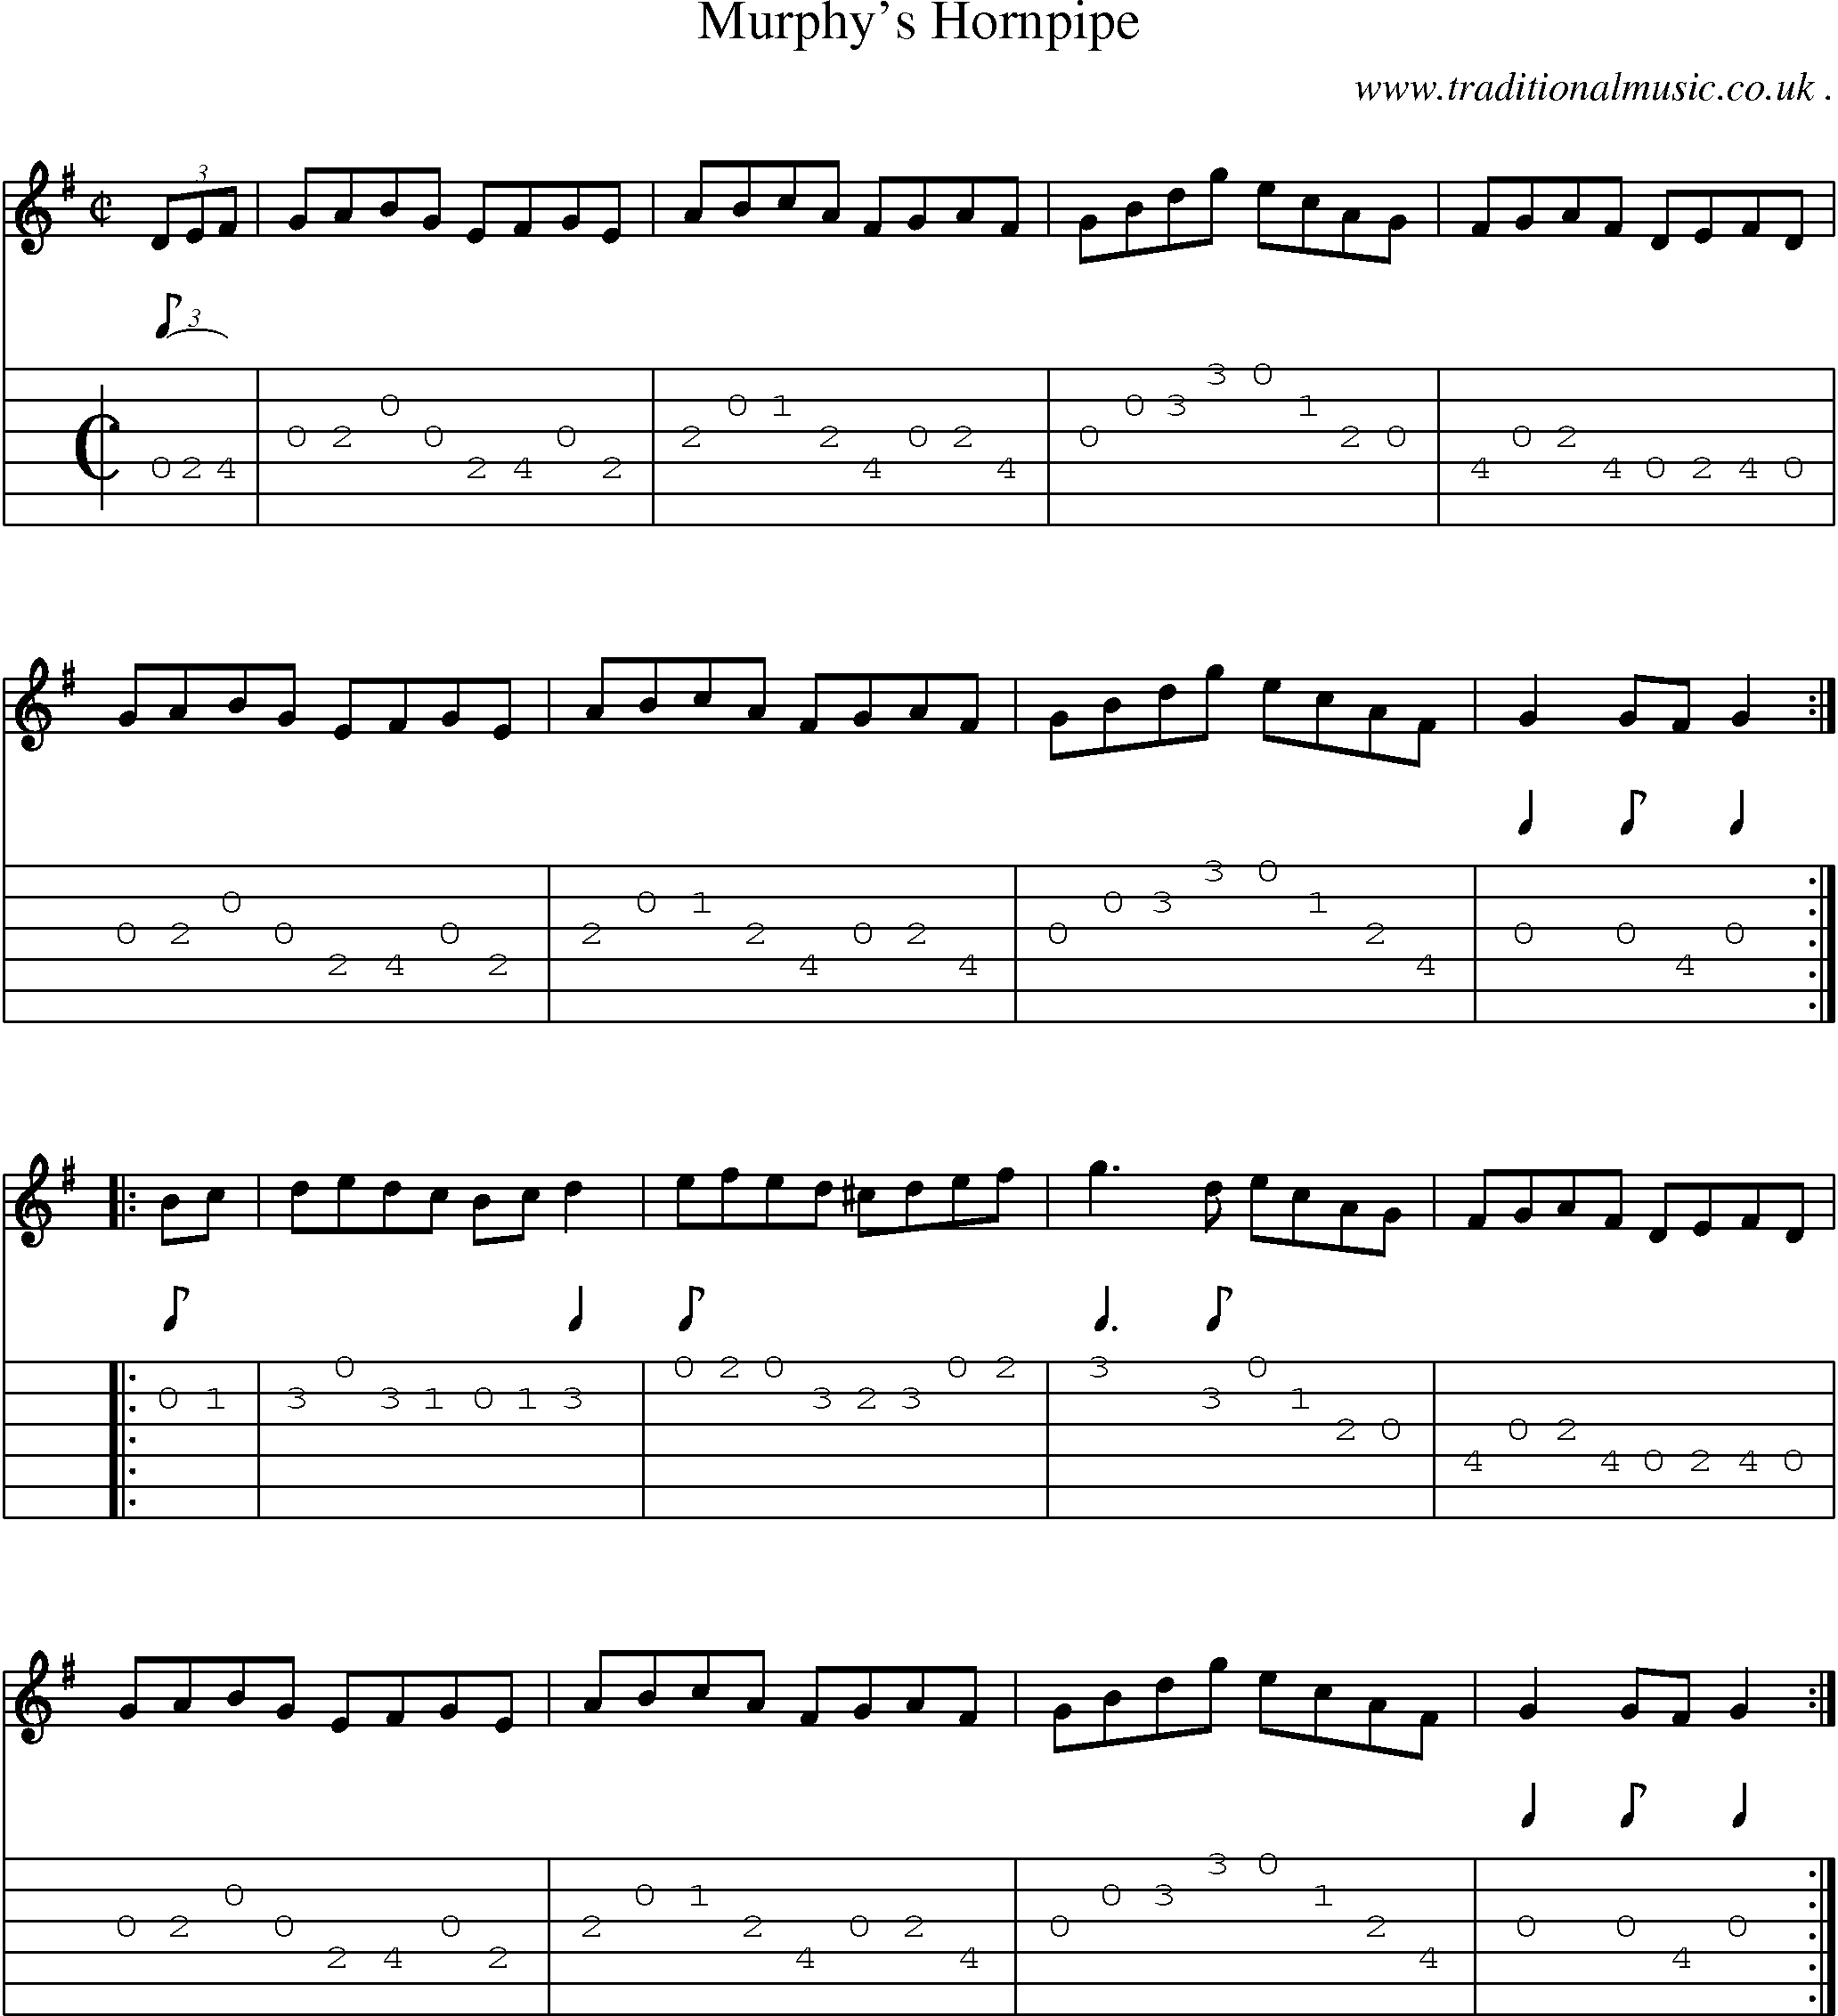 Sheet-Music and Guitar Tabs for Murphys Hornpipe